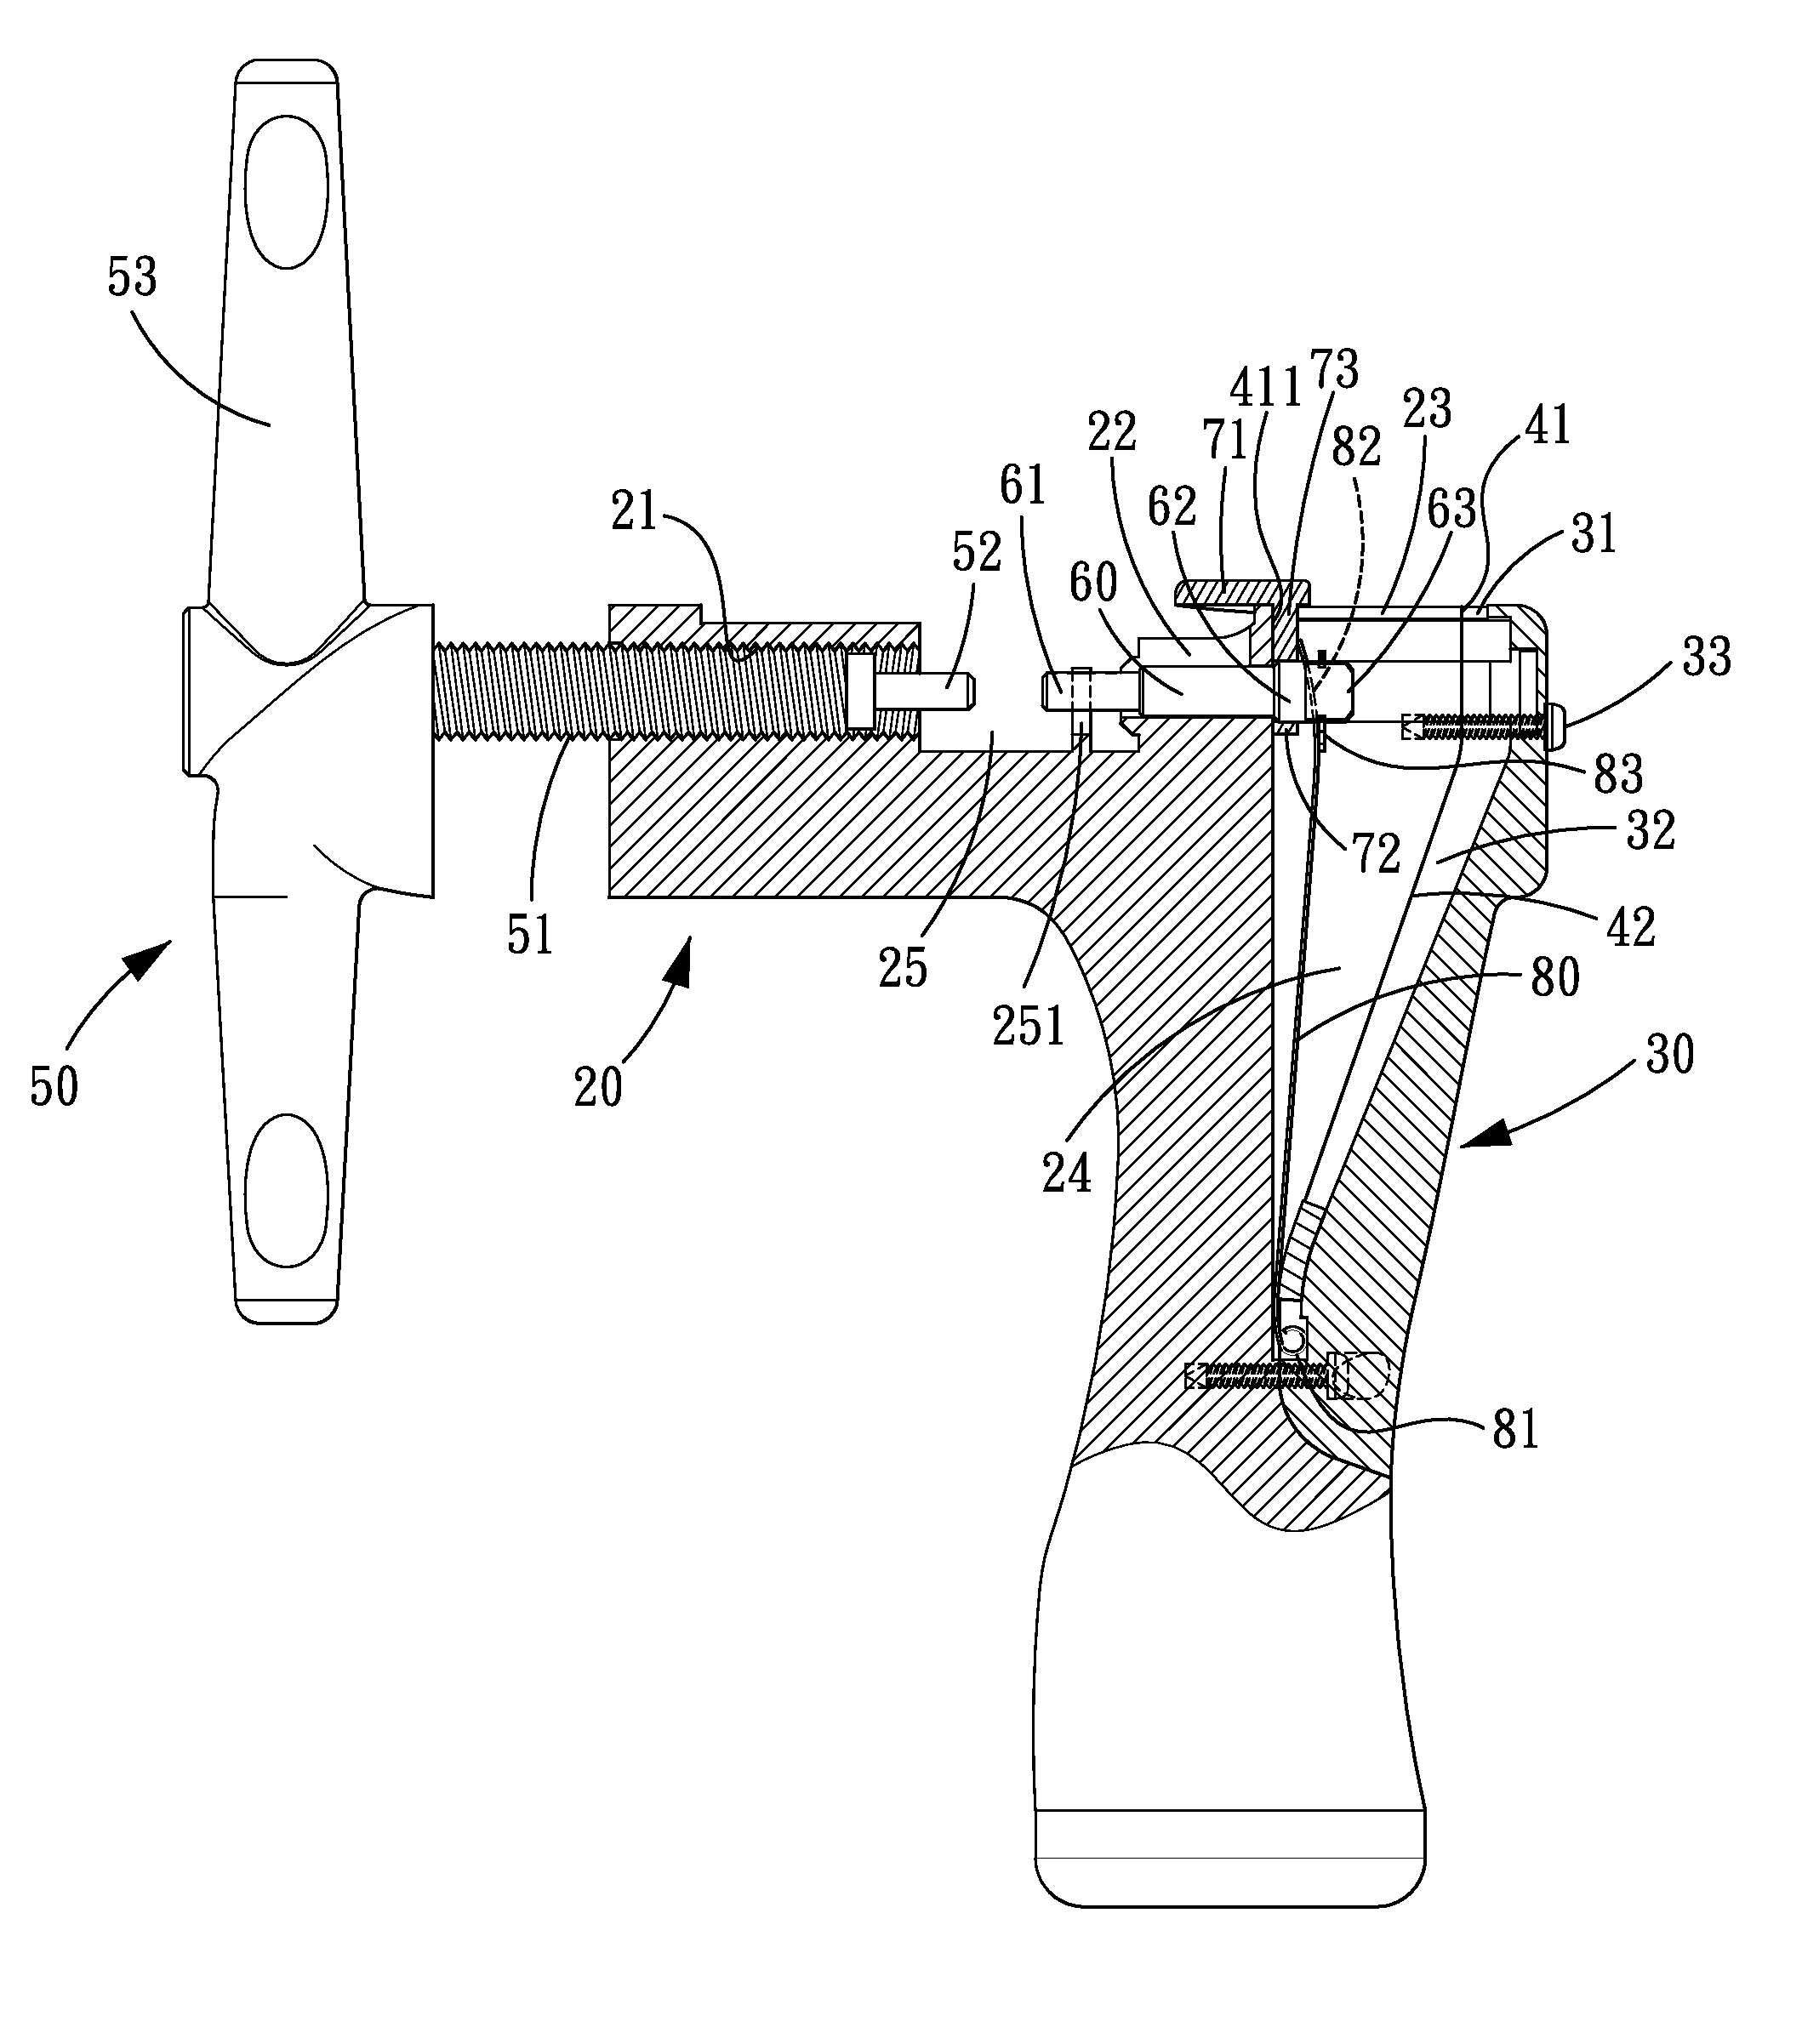 Device for assembling and disassembling a bicycle chain